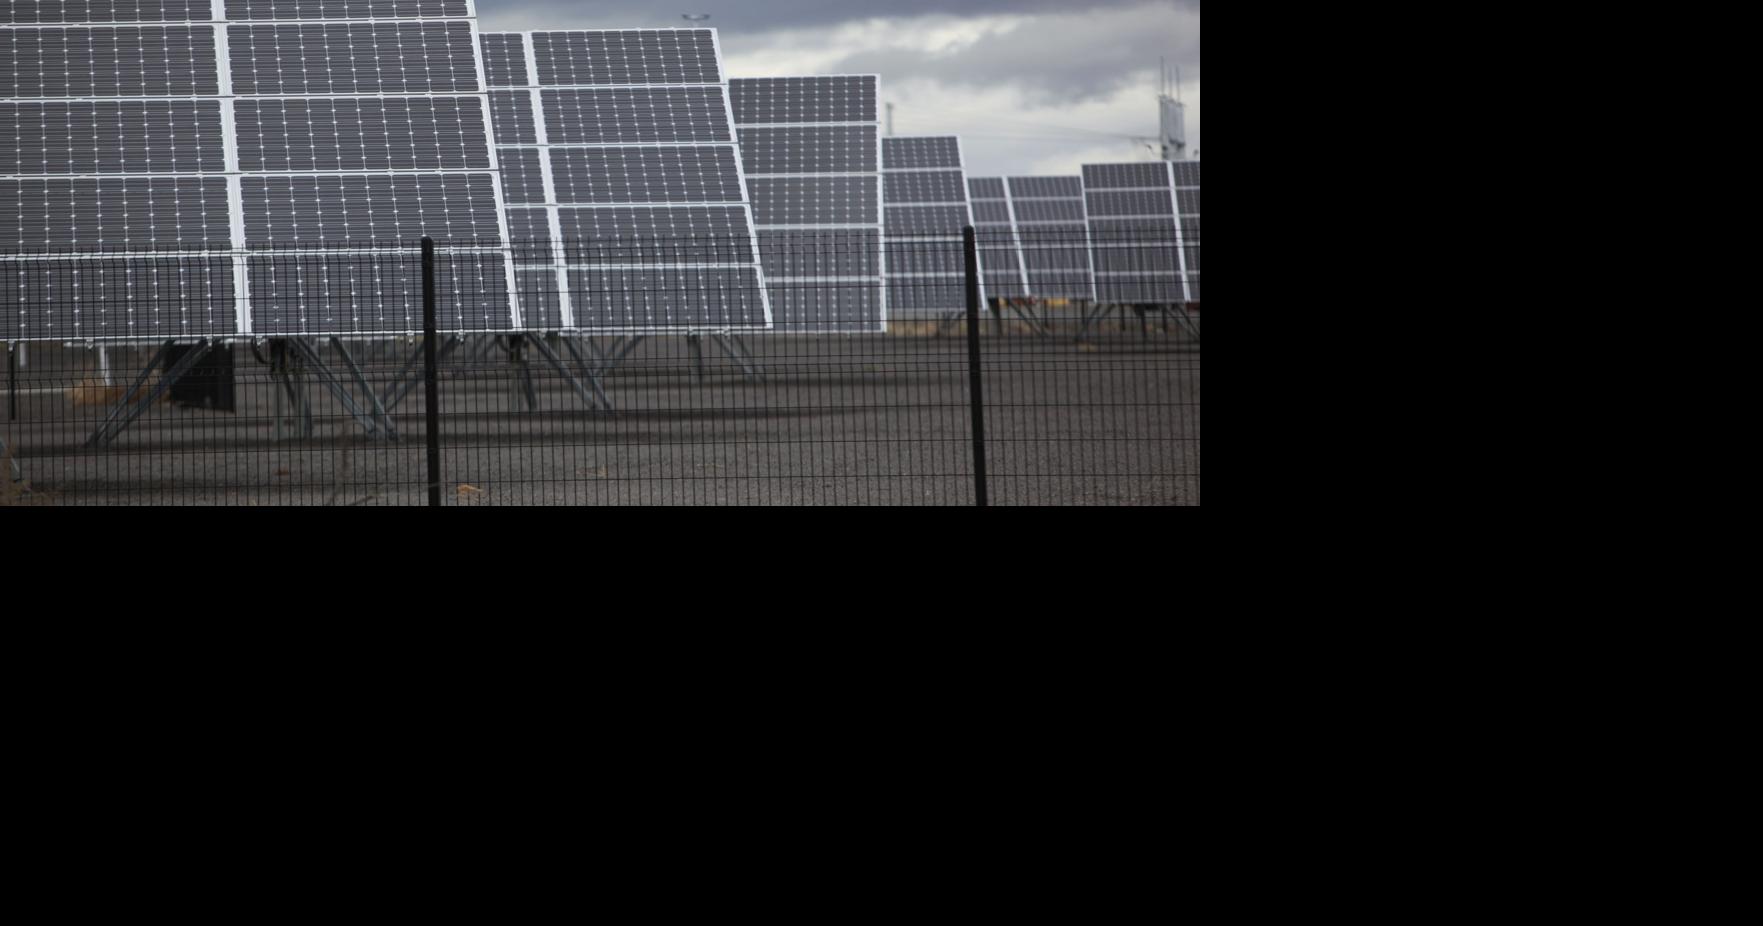 The grid is at capacity for solar power in parts of Oregon, Local&State